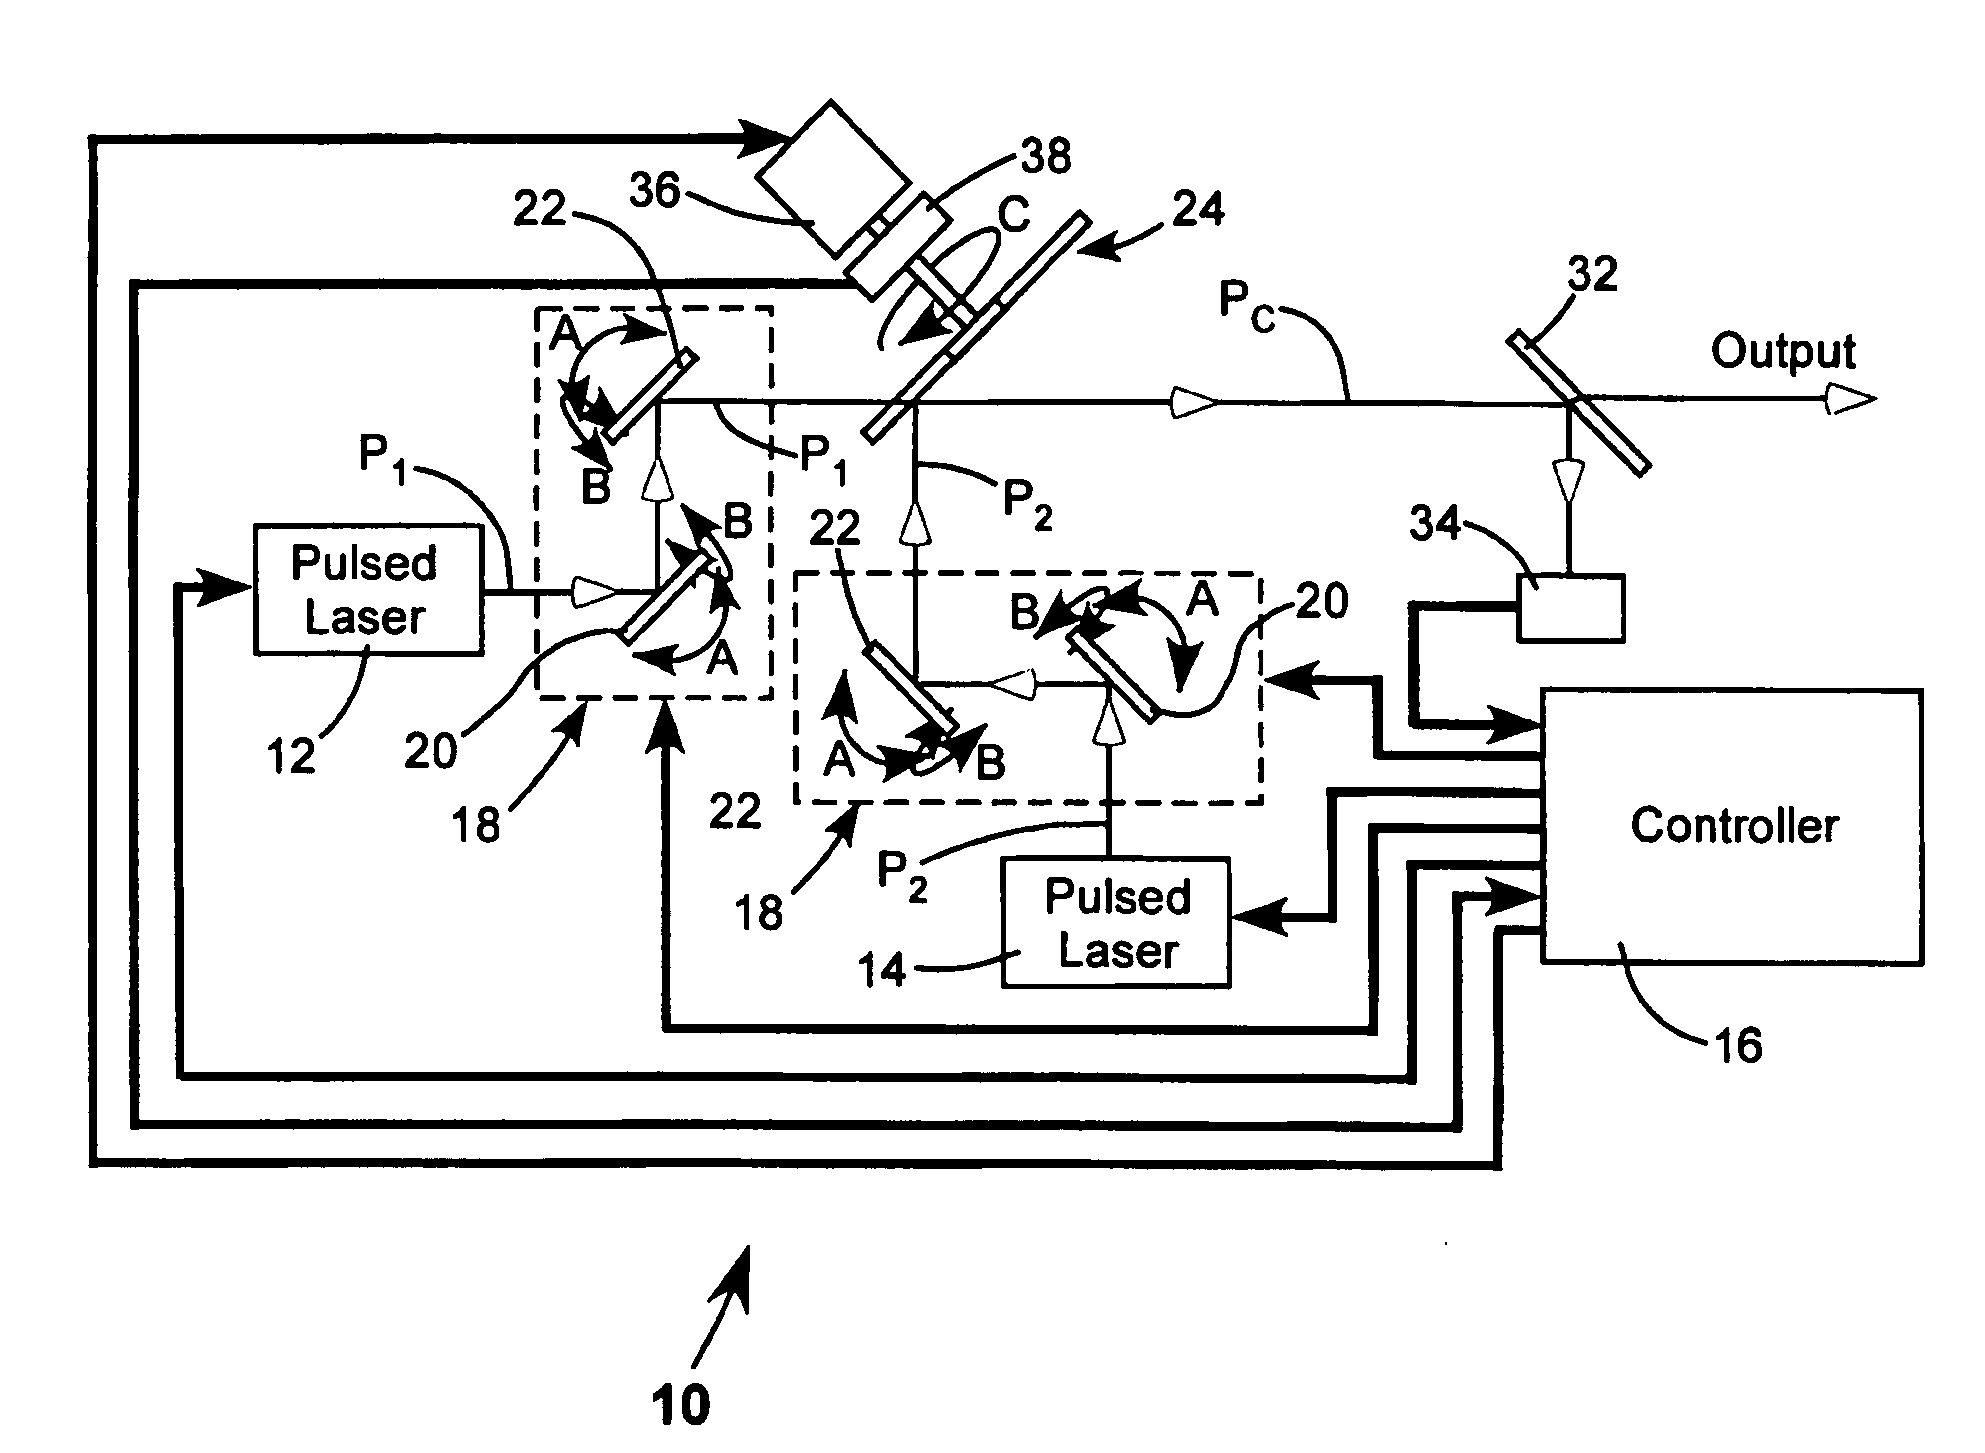 Apparatus for combining beams from repetitively pulsed lasers along a common path